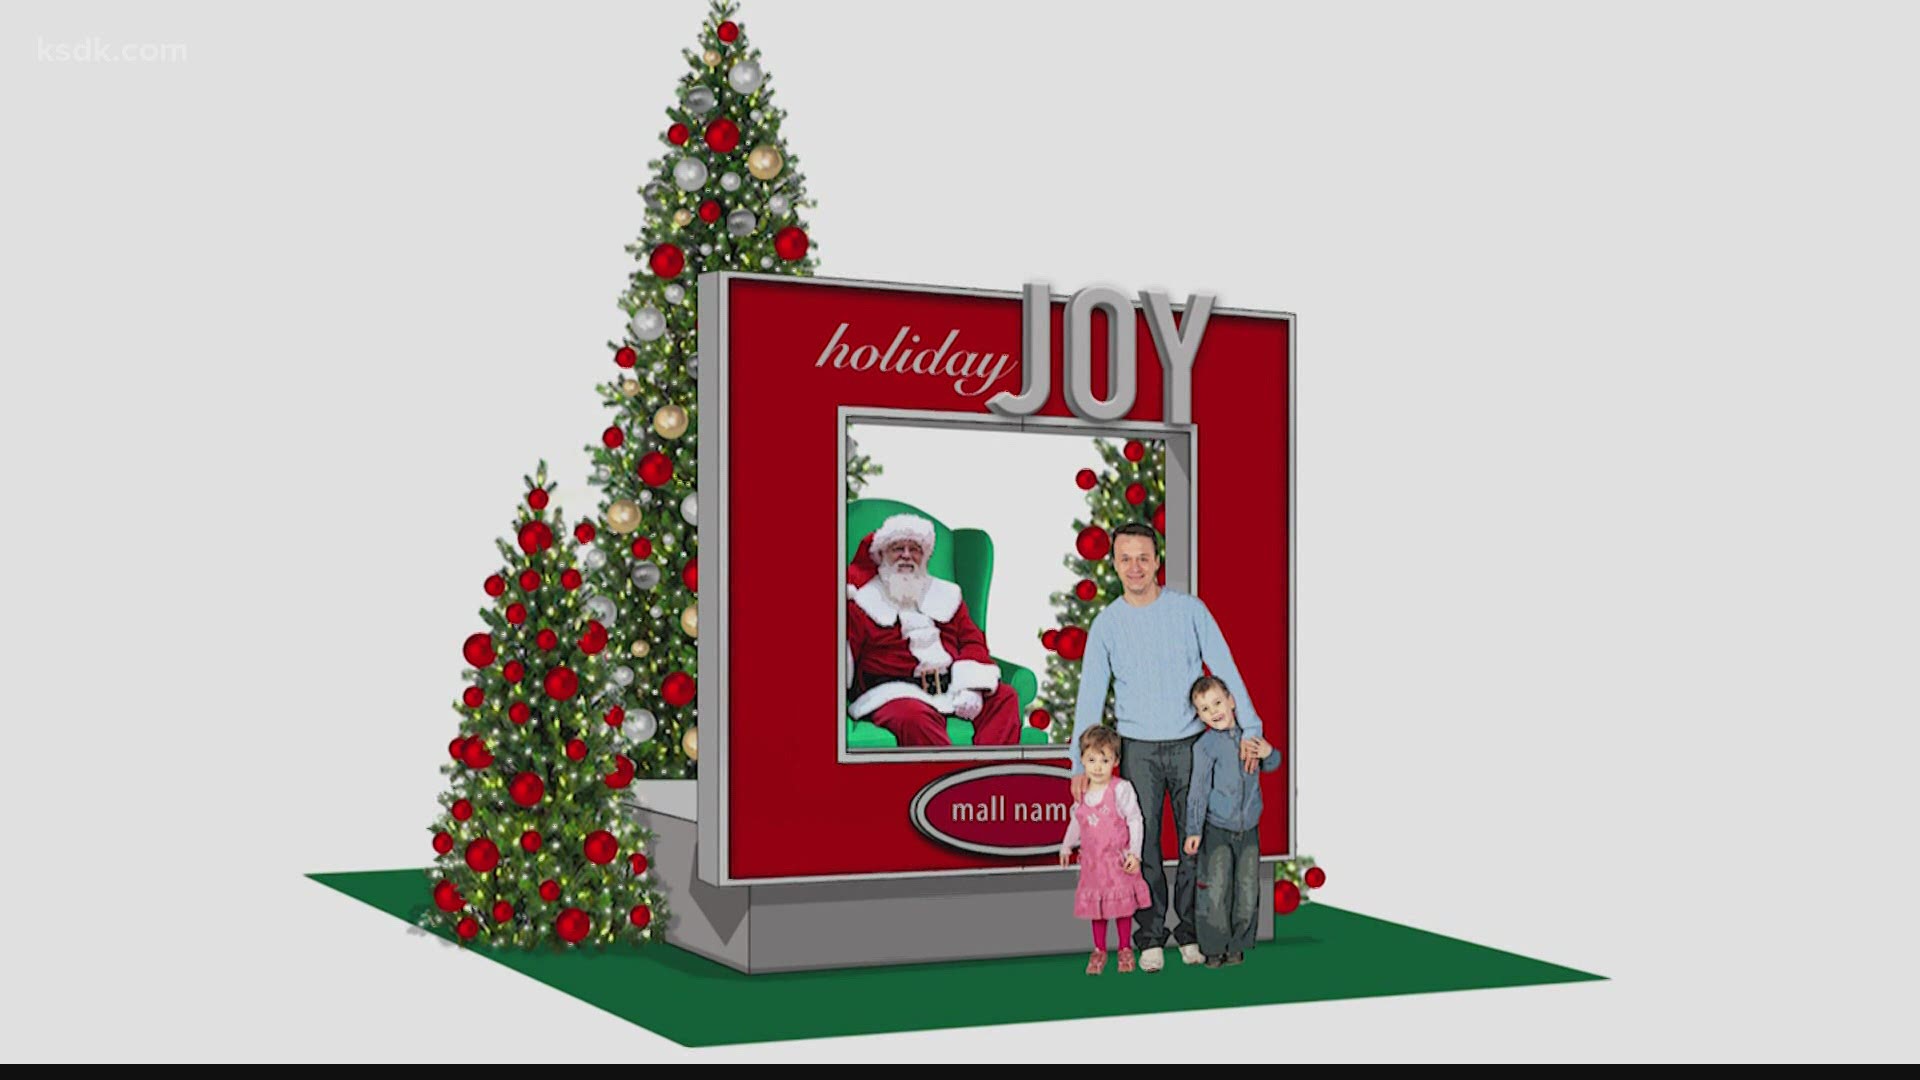 The owner of the Galleria and Plaza Frontenac has announced it will offer a "touchless experience" with Santa.